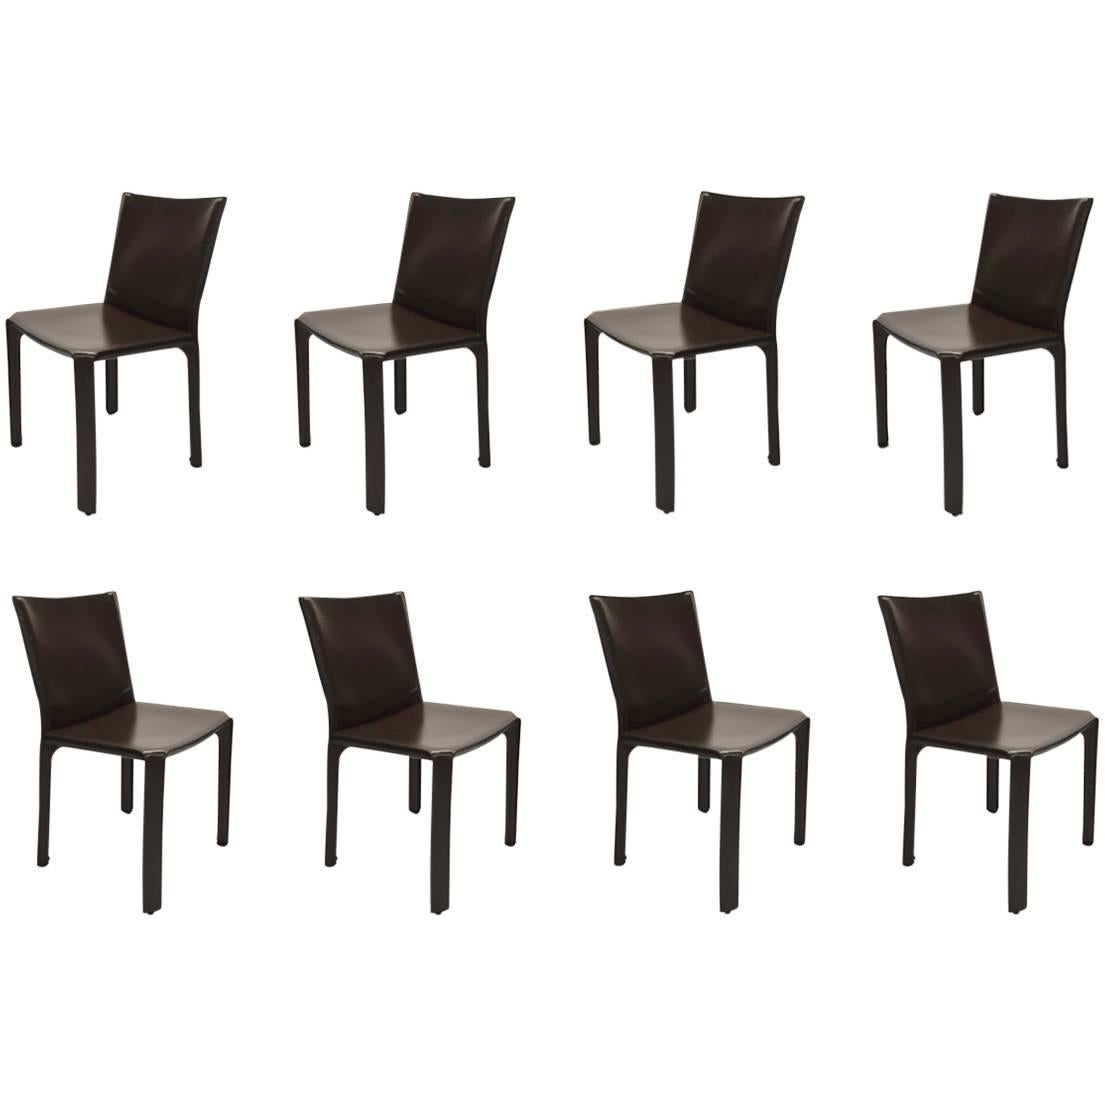 Eight Armless Brown Leather CAB Chairs by Mario Bellini for Cassina, 1977, Italy